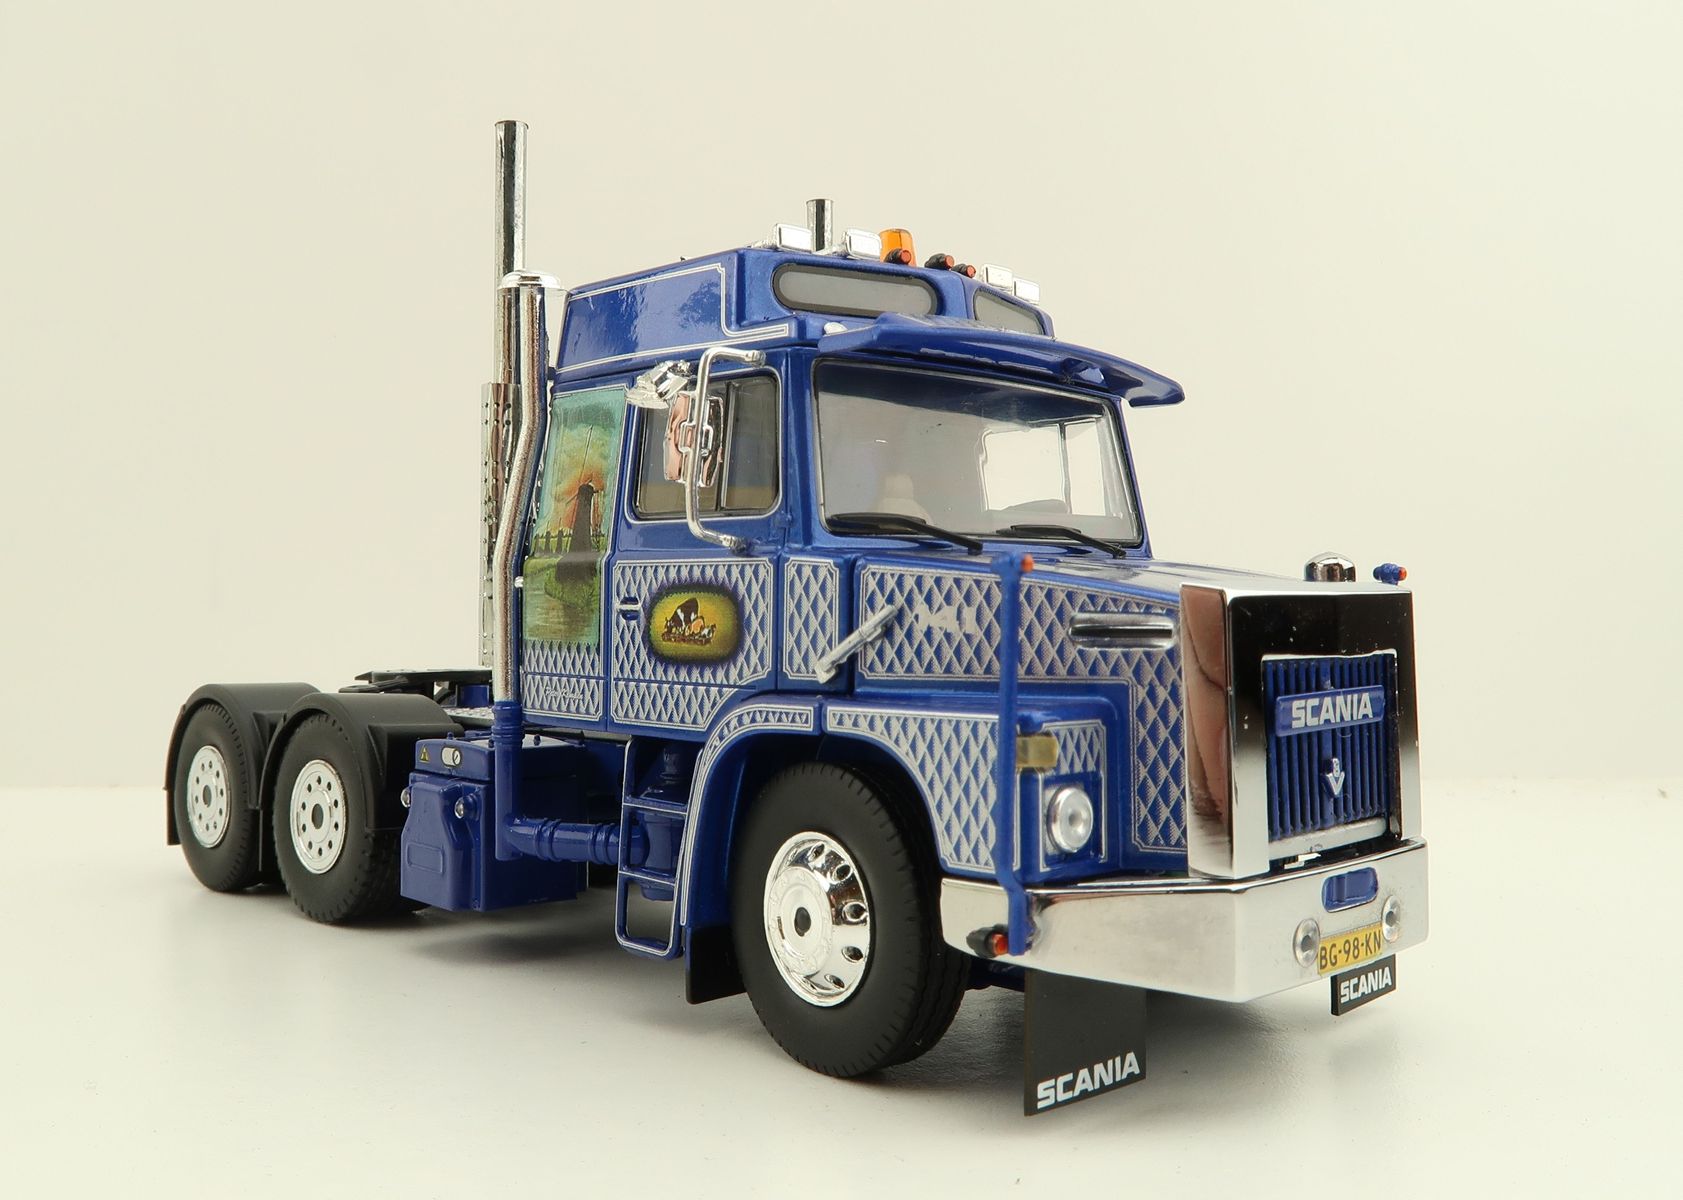 Product Image - Tekno 75815 Scania 141 Torpedo 6x2 Truck Prime Mover - Peter Kempen - Scale 1:50